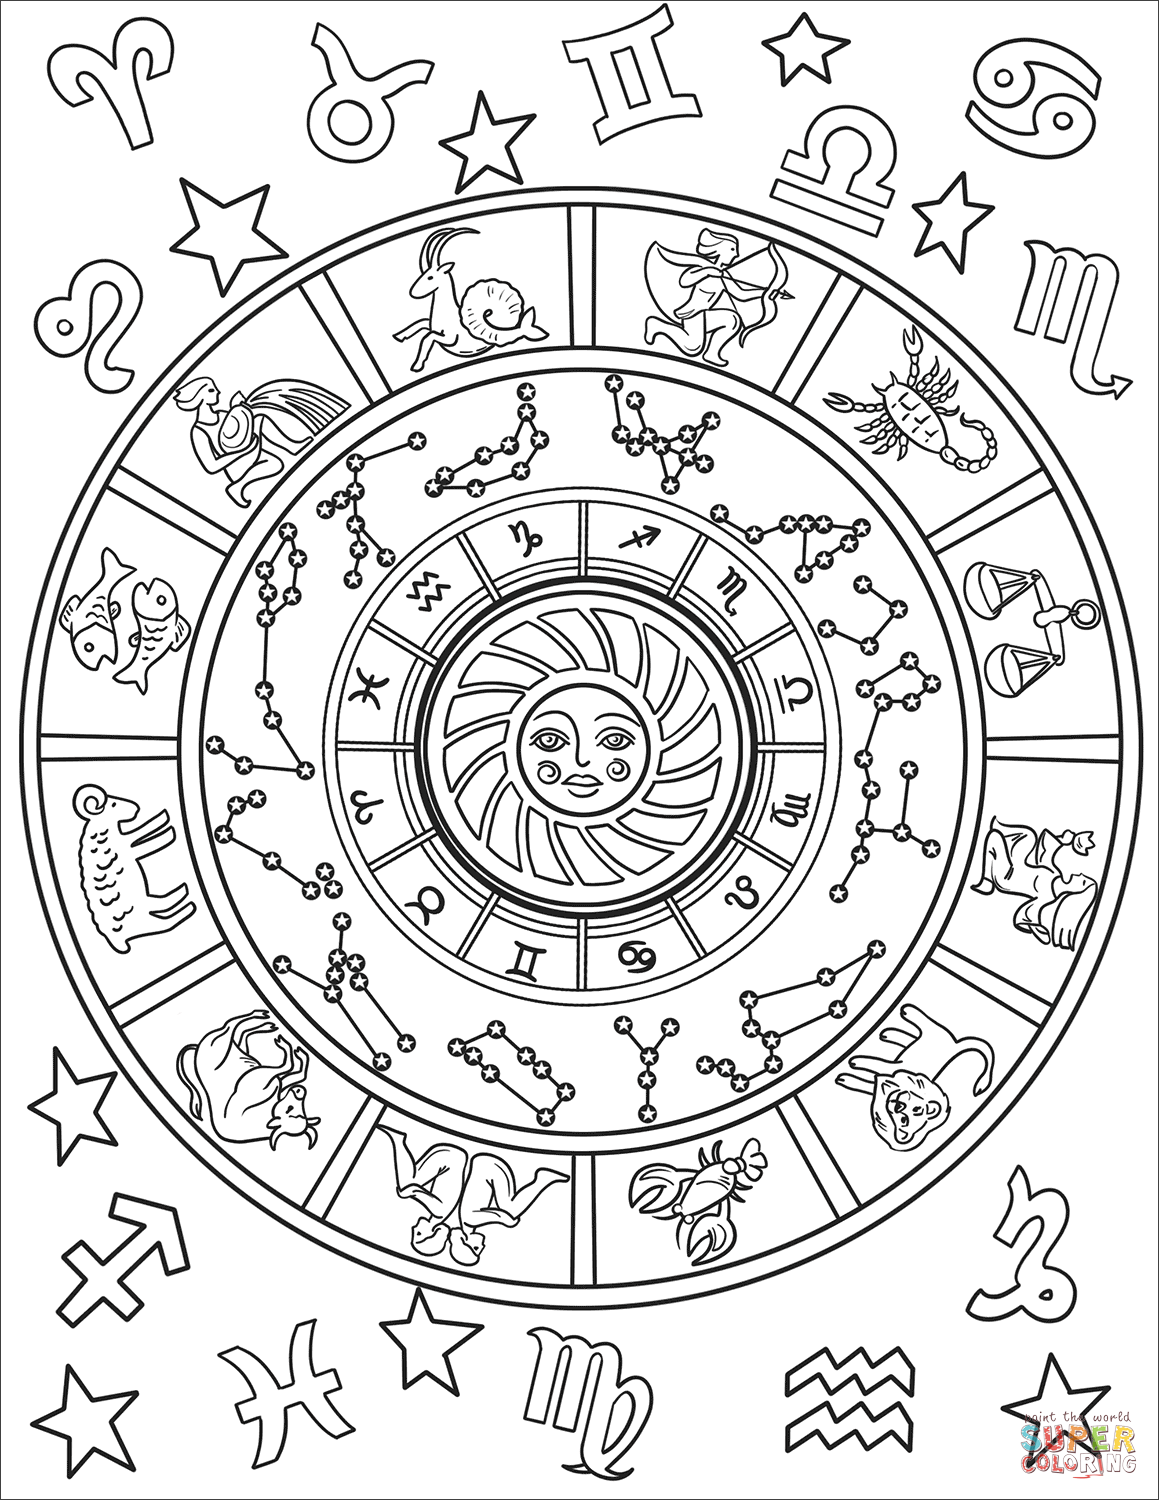 All Zodiac Signs Coloring Page Free Printable Coloring Pages